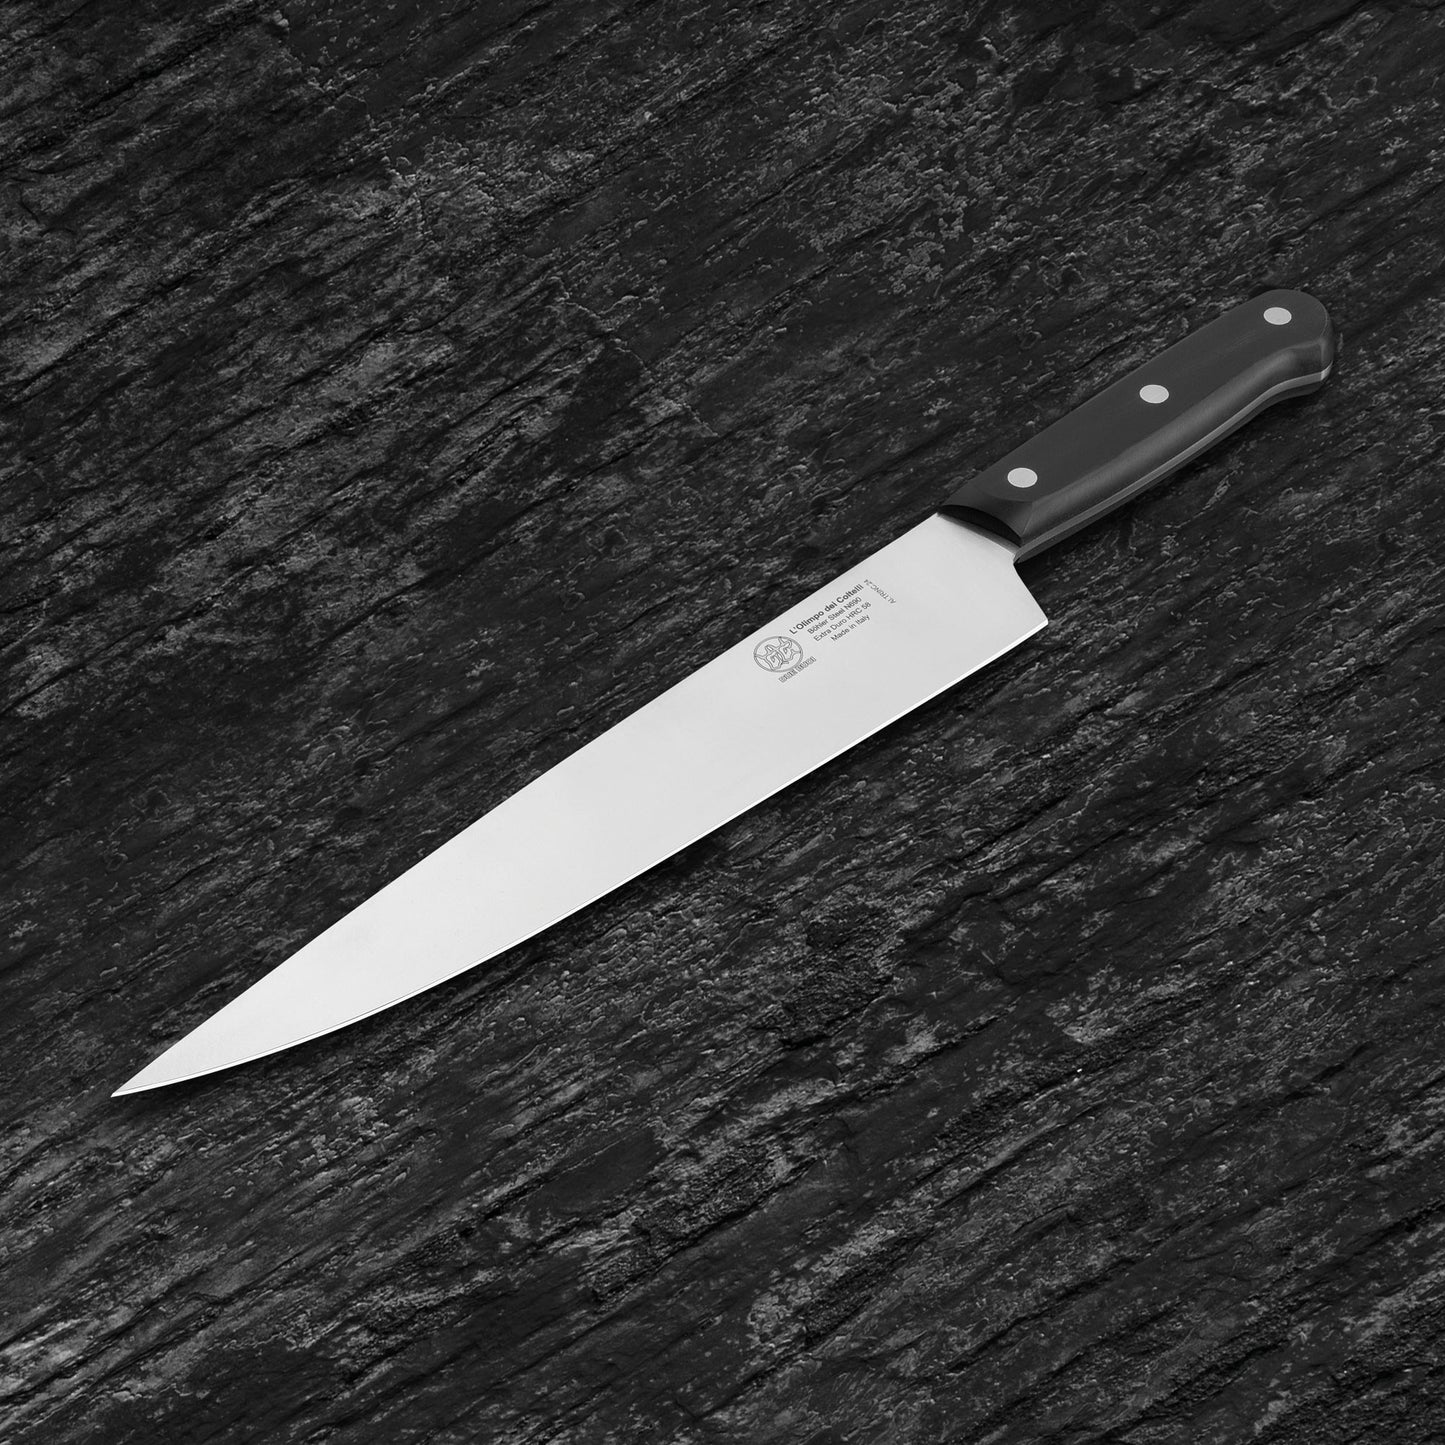 
                  
                    Chef Kitchen Knife - Blade 9.04" - N690 Stainless Steel - Hrc 60 - Black Technical Polymer Handle
                  
                